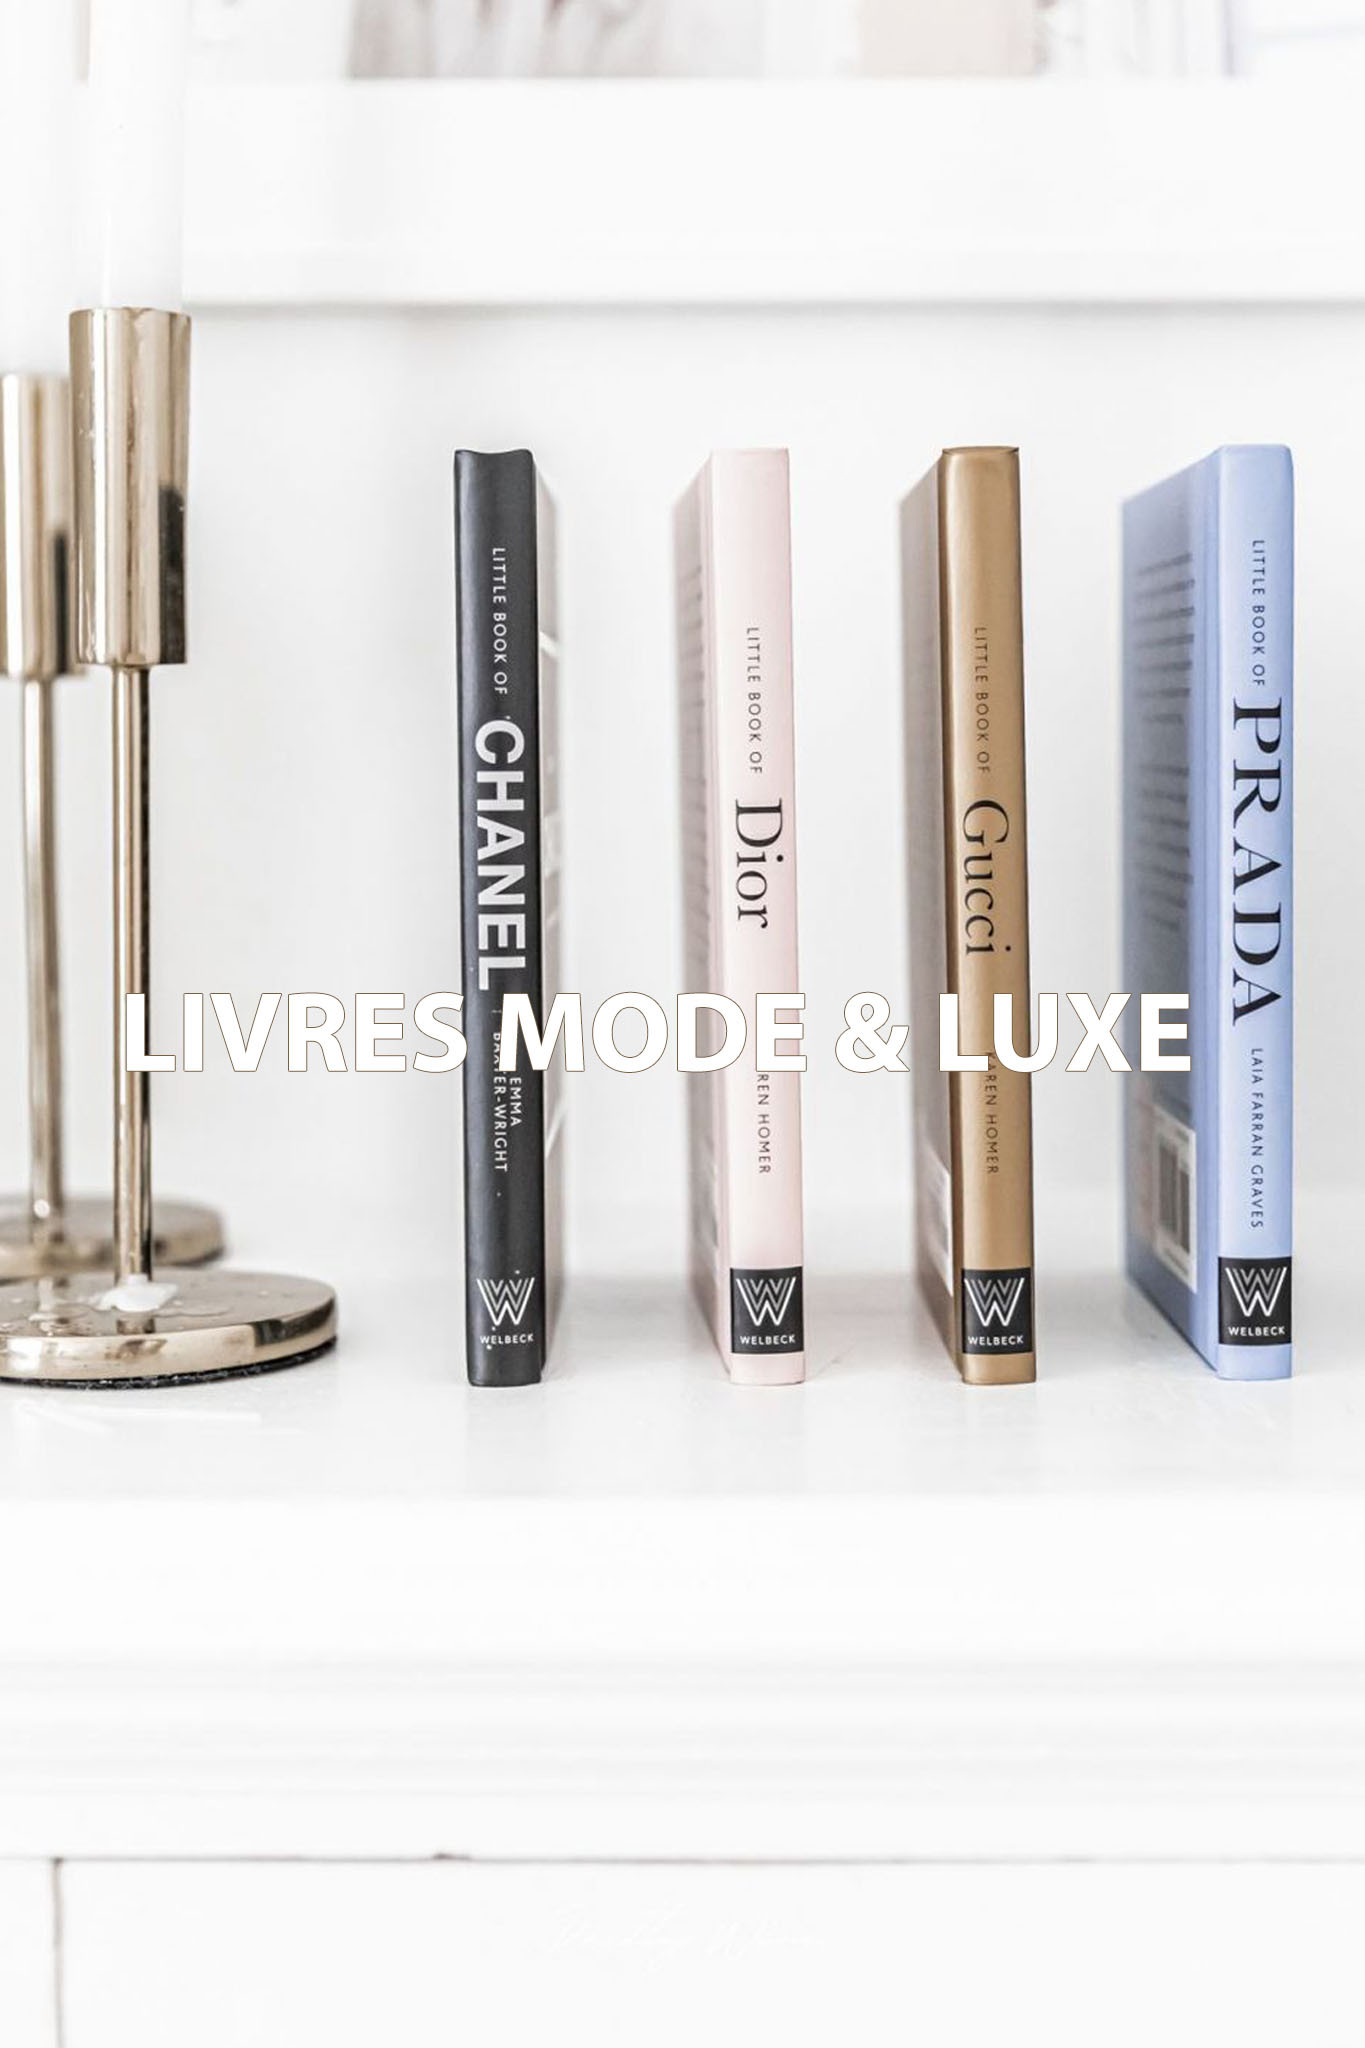 /822--livres-mode-luxe